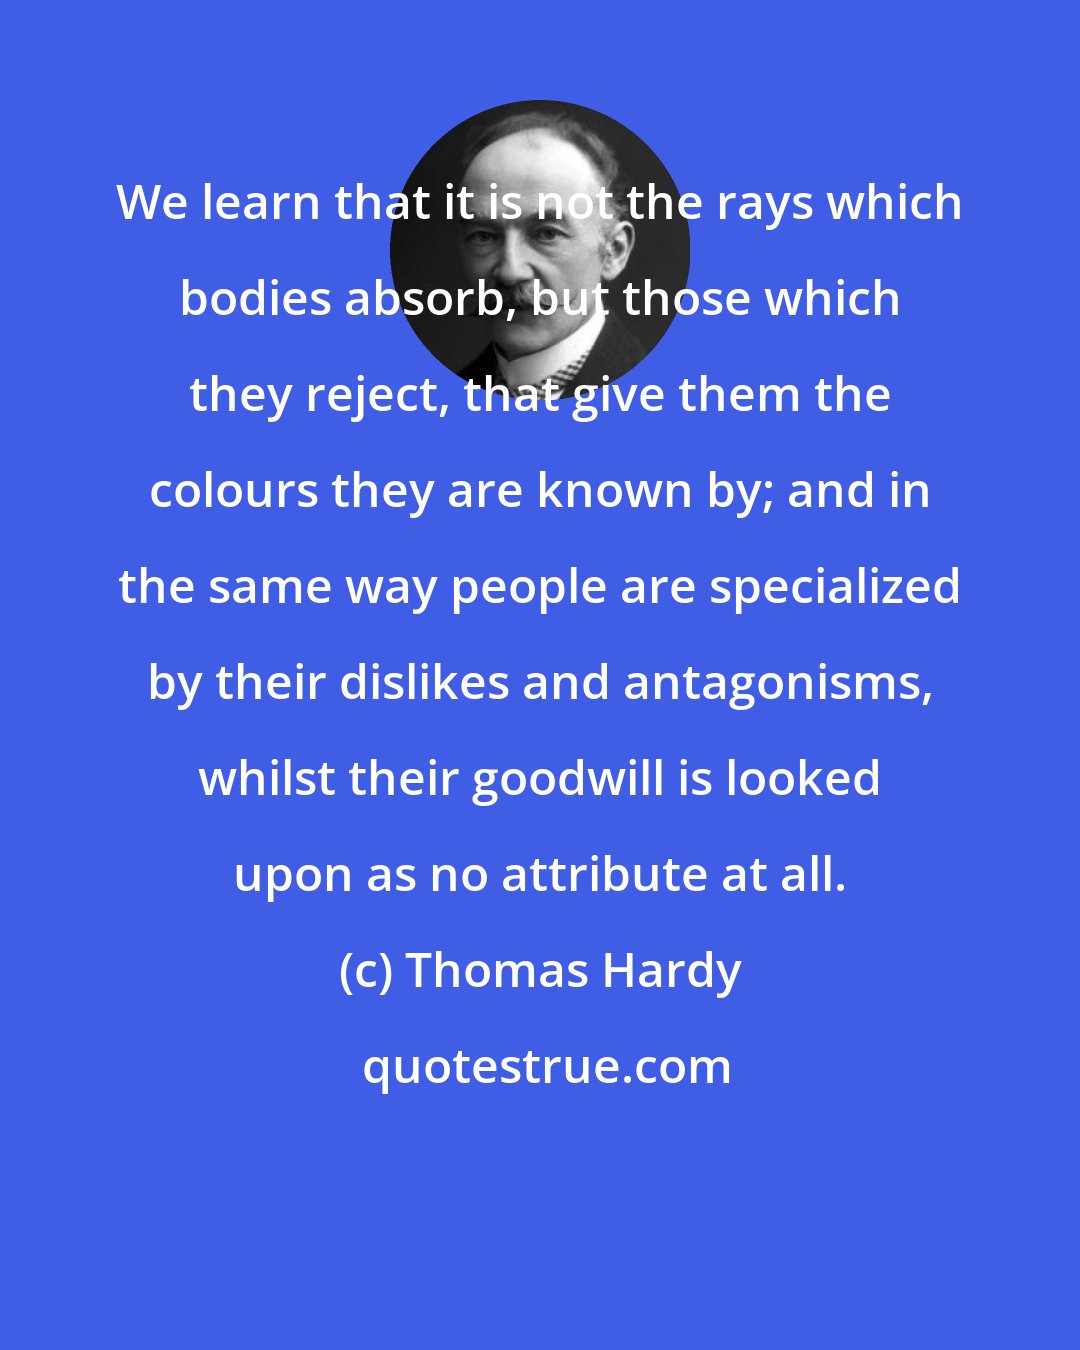 Thomas Hardy: We learn that it is not the rays which bodies absorb, but those which they reject, that give them the colours they are known by; and in the same way people are specialized by their dislikes and antagonisms, whilst their goodwill is looked upon as no attribute at all.